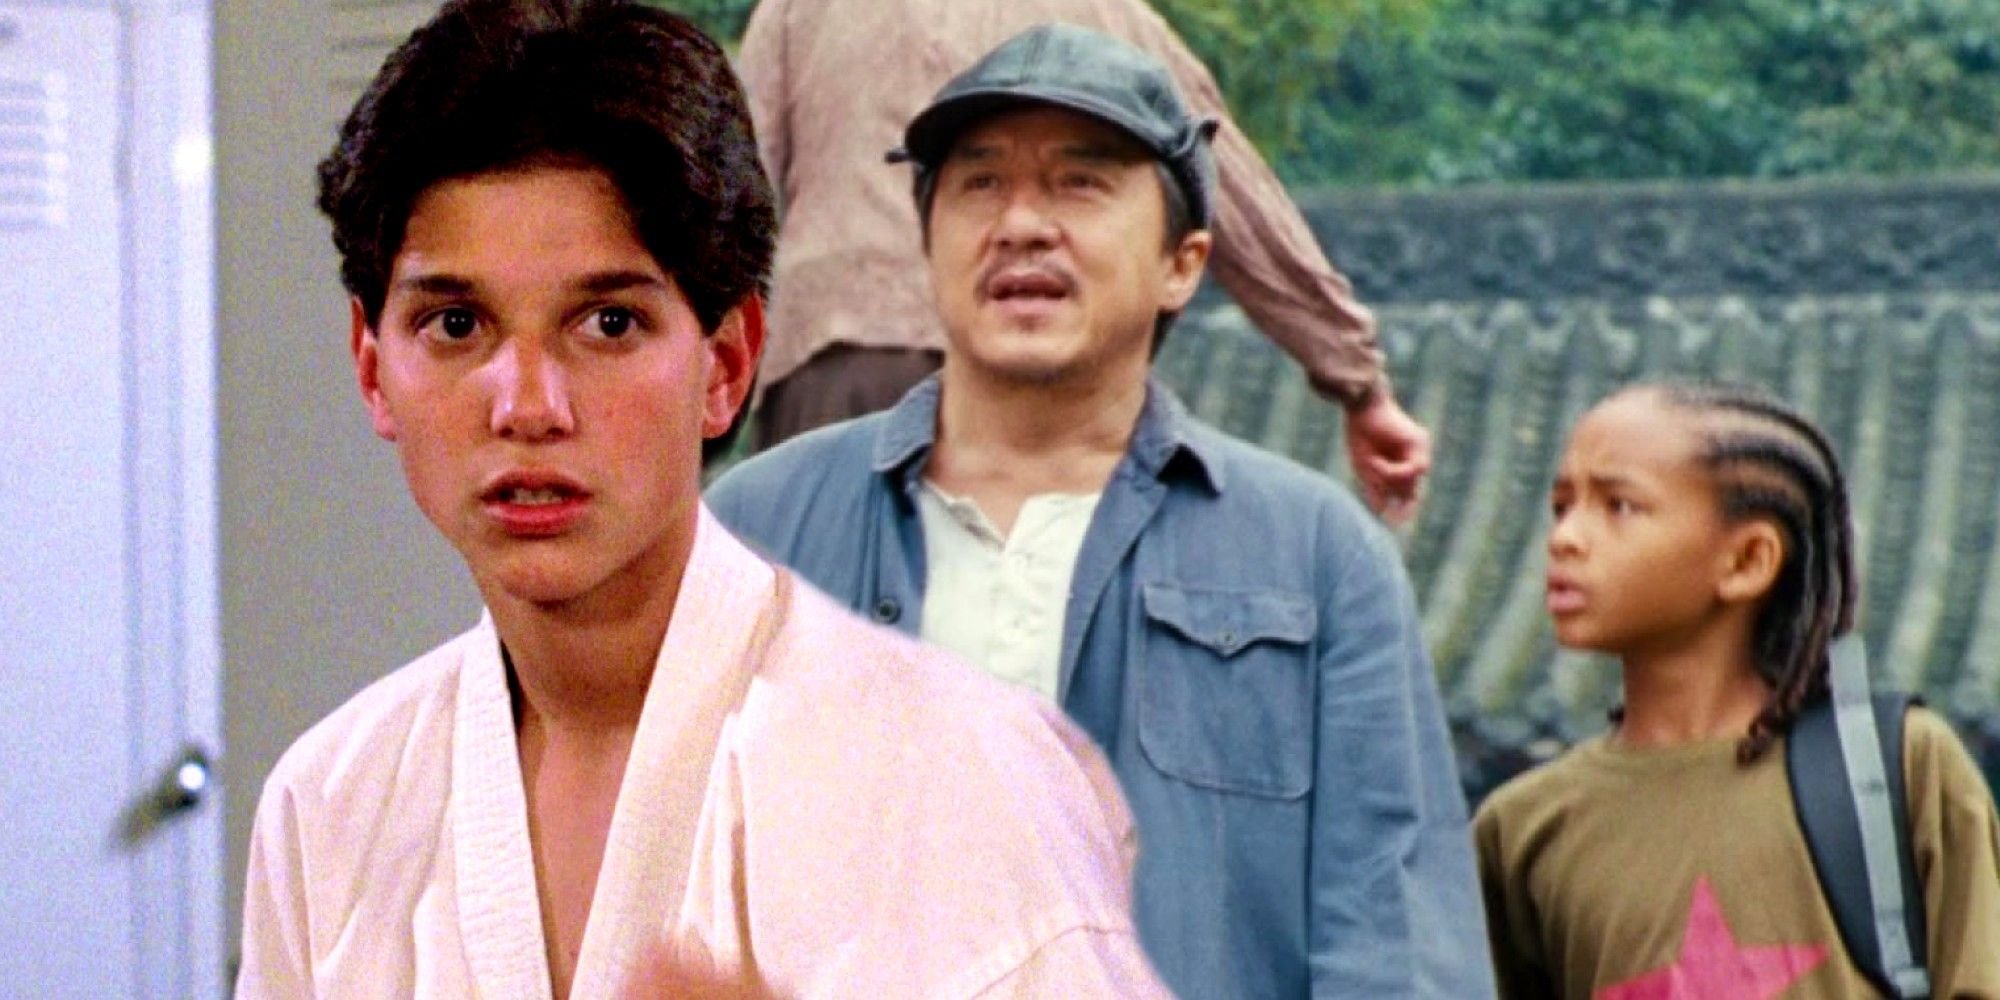 Custom image of Daniel LaRusso and Mr. Han in the Karate Kid franchise